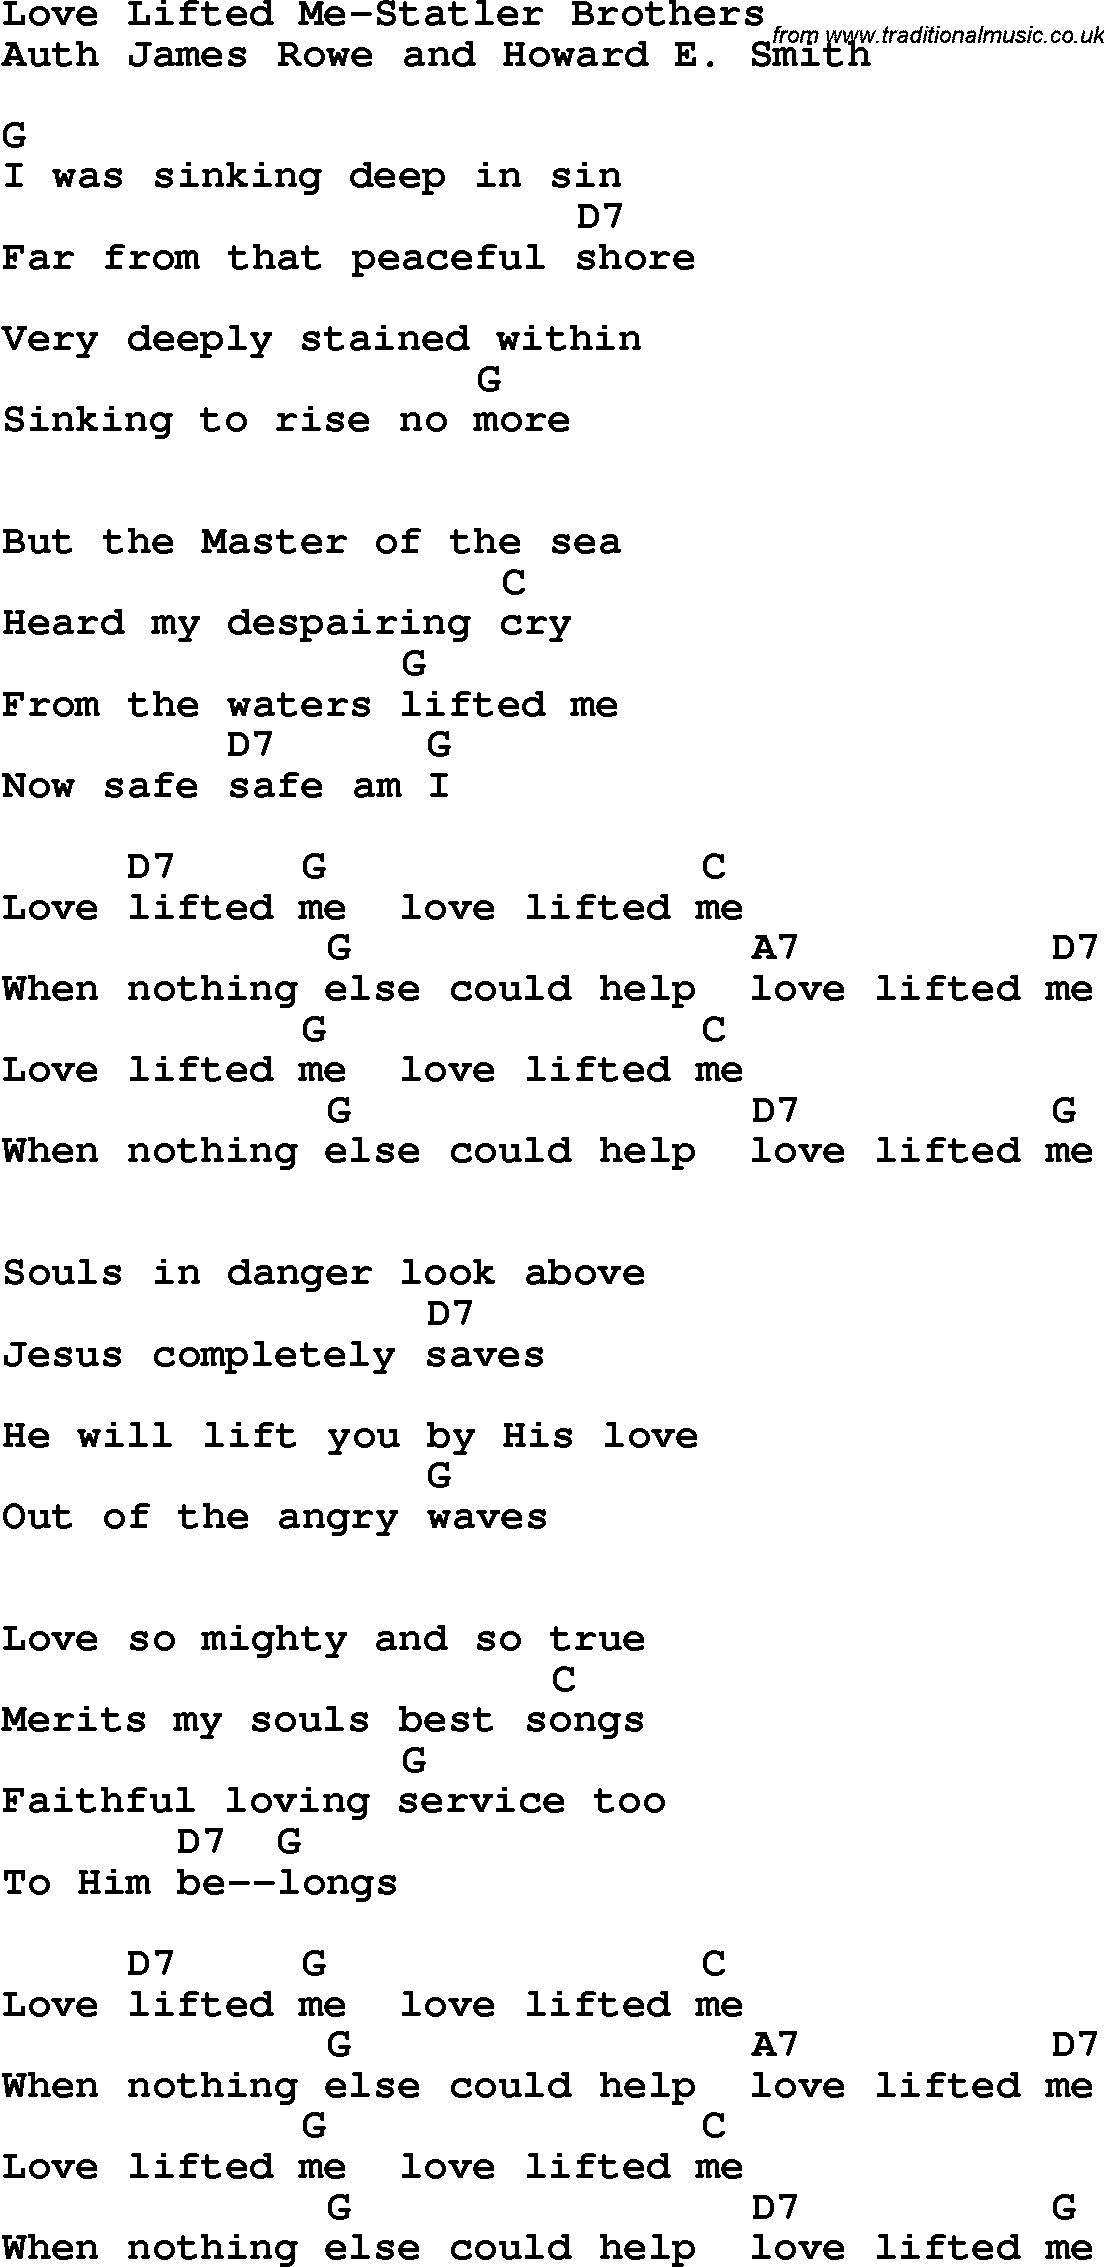 Country, Southern and Bluegrass Gospel Song Love Lifted Me-Statler Brothers lyrics and chords